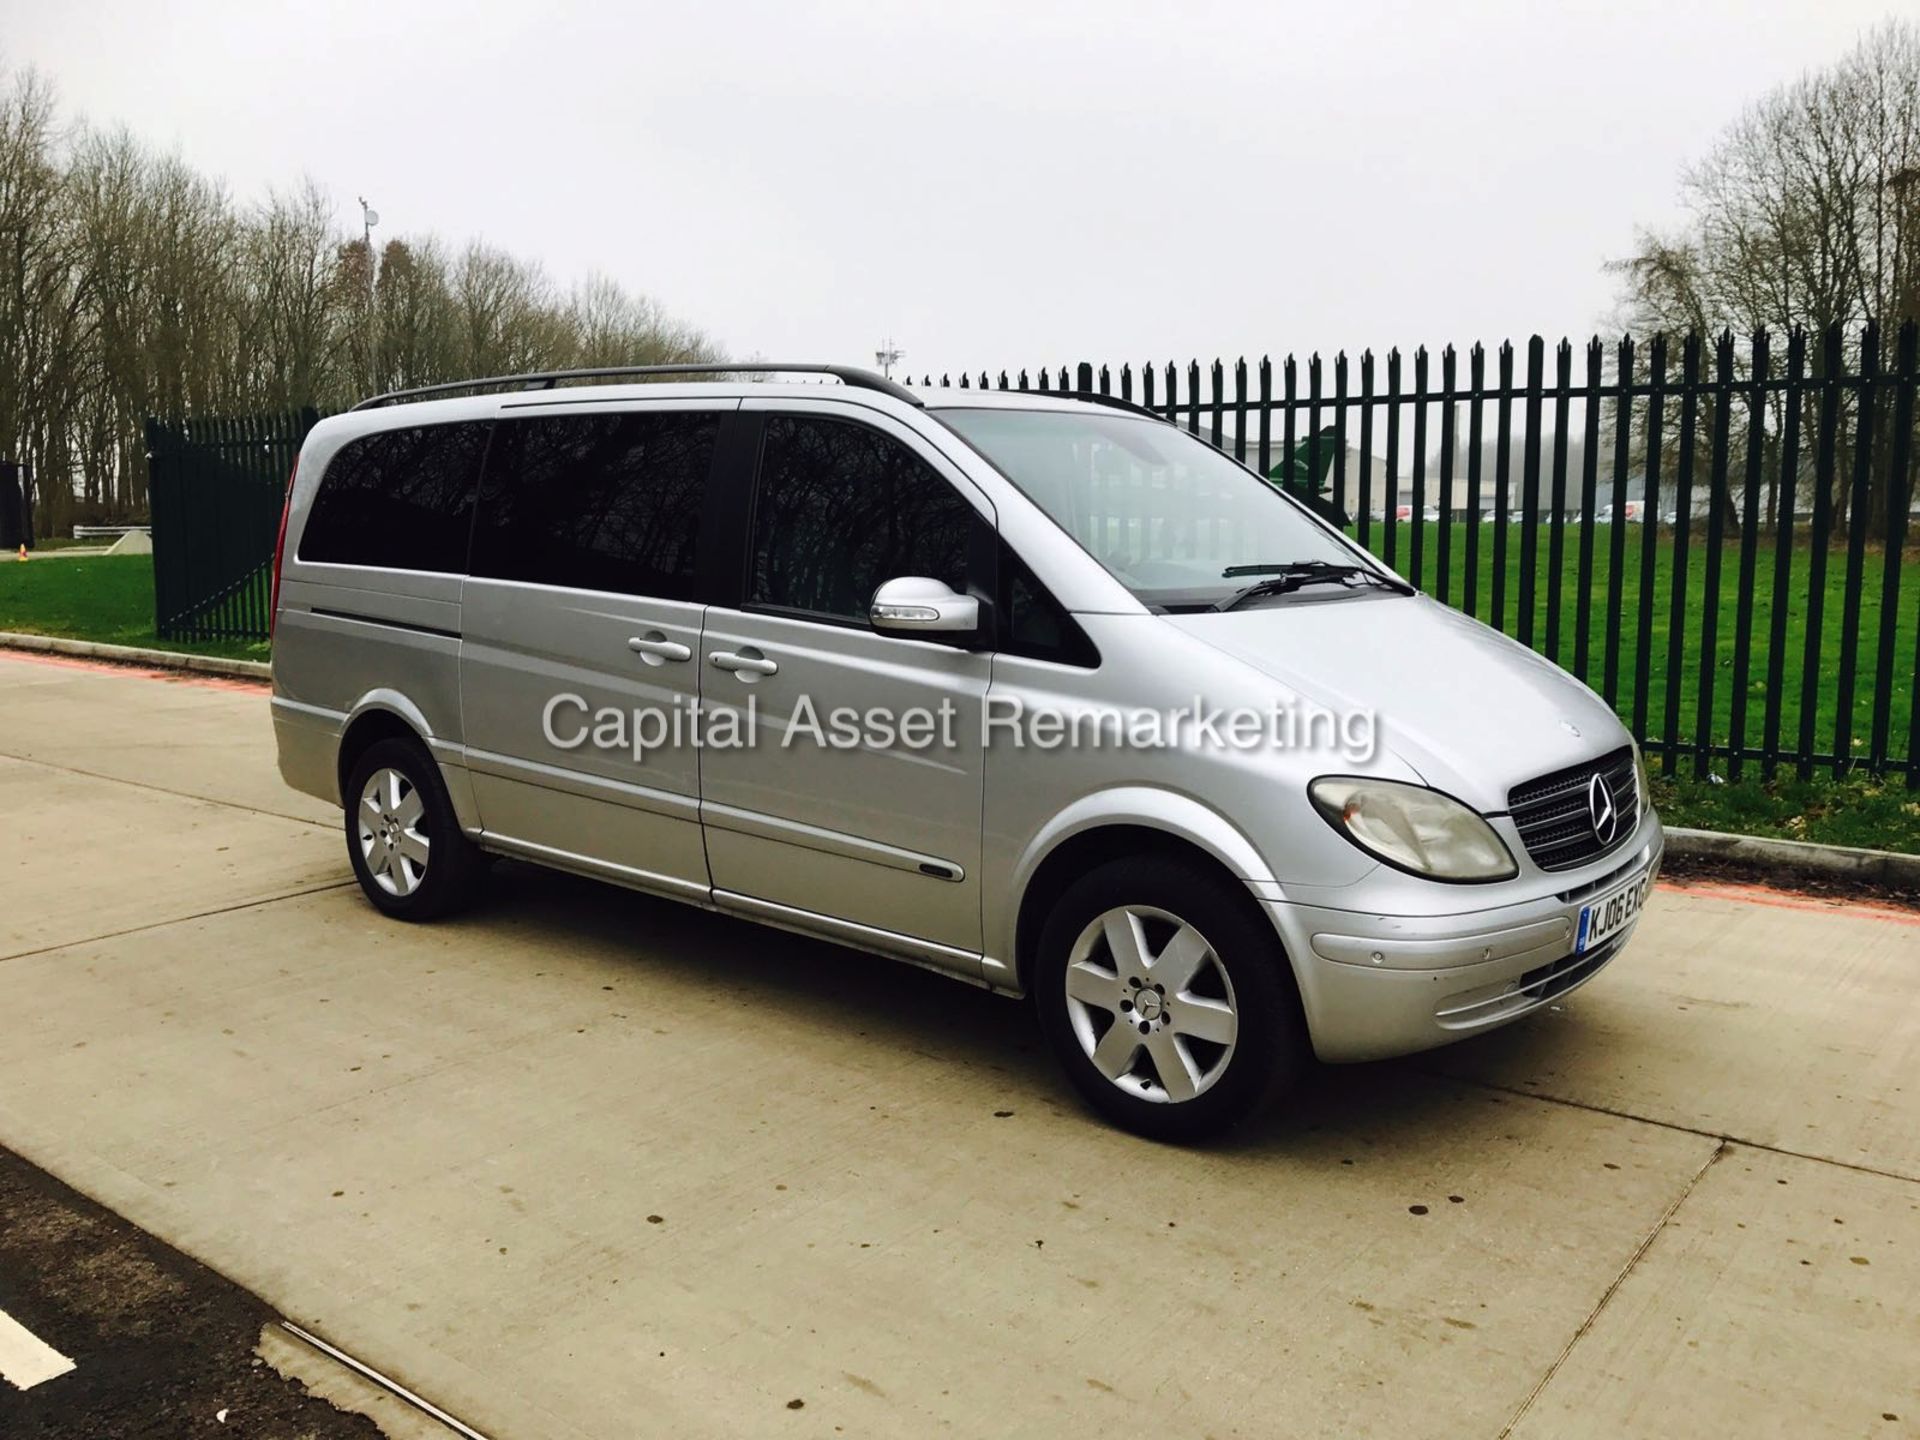 ON SALE MERCEDES VIANO 2.2CDI AUTO"AMBIENTE"LWB / LUXURY TRAVEL LINER - FULL LOADED-SAT NAV -LEATHER